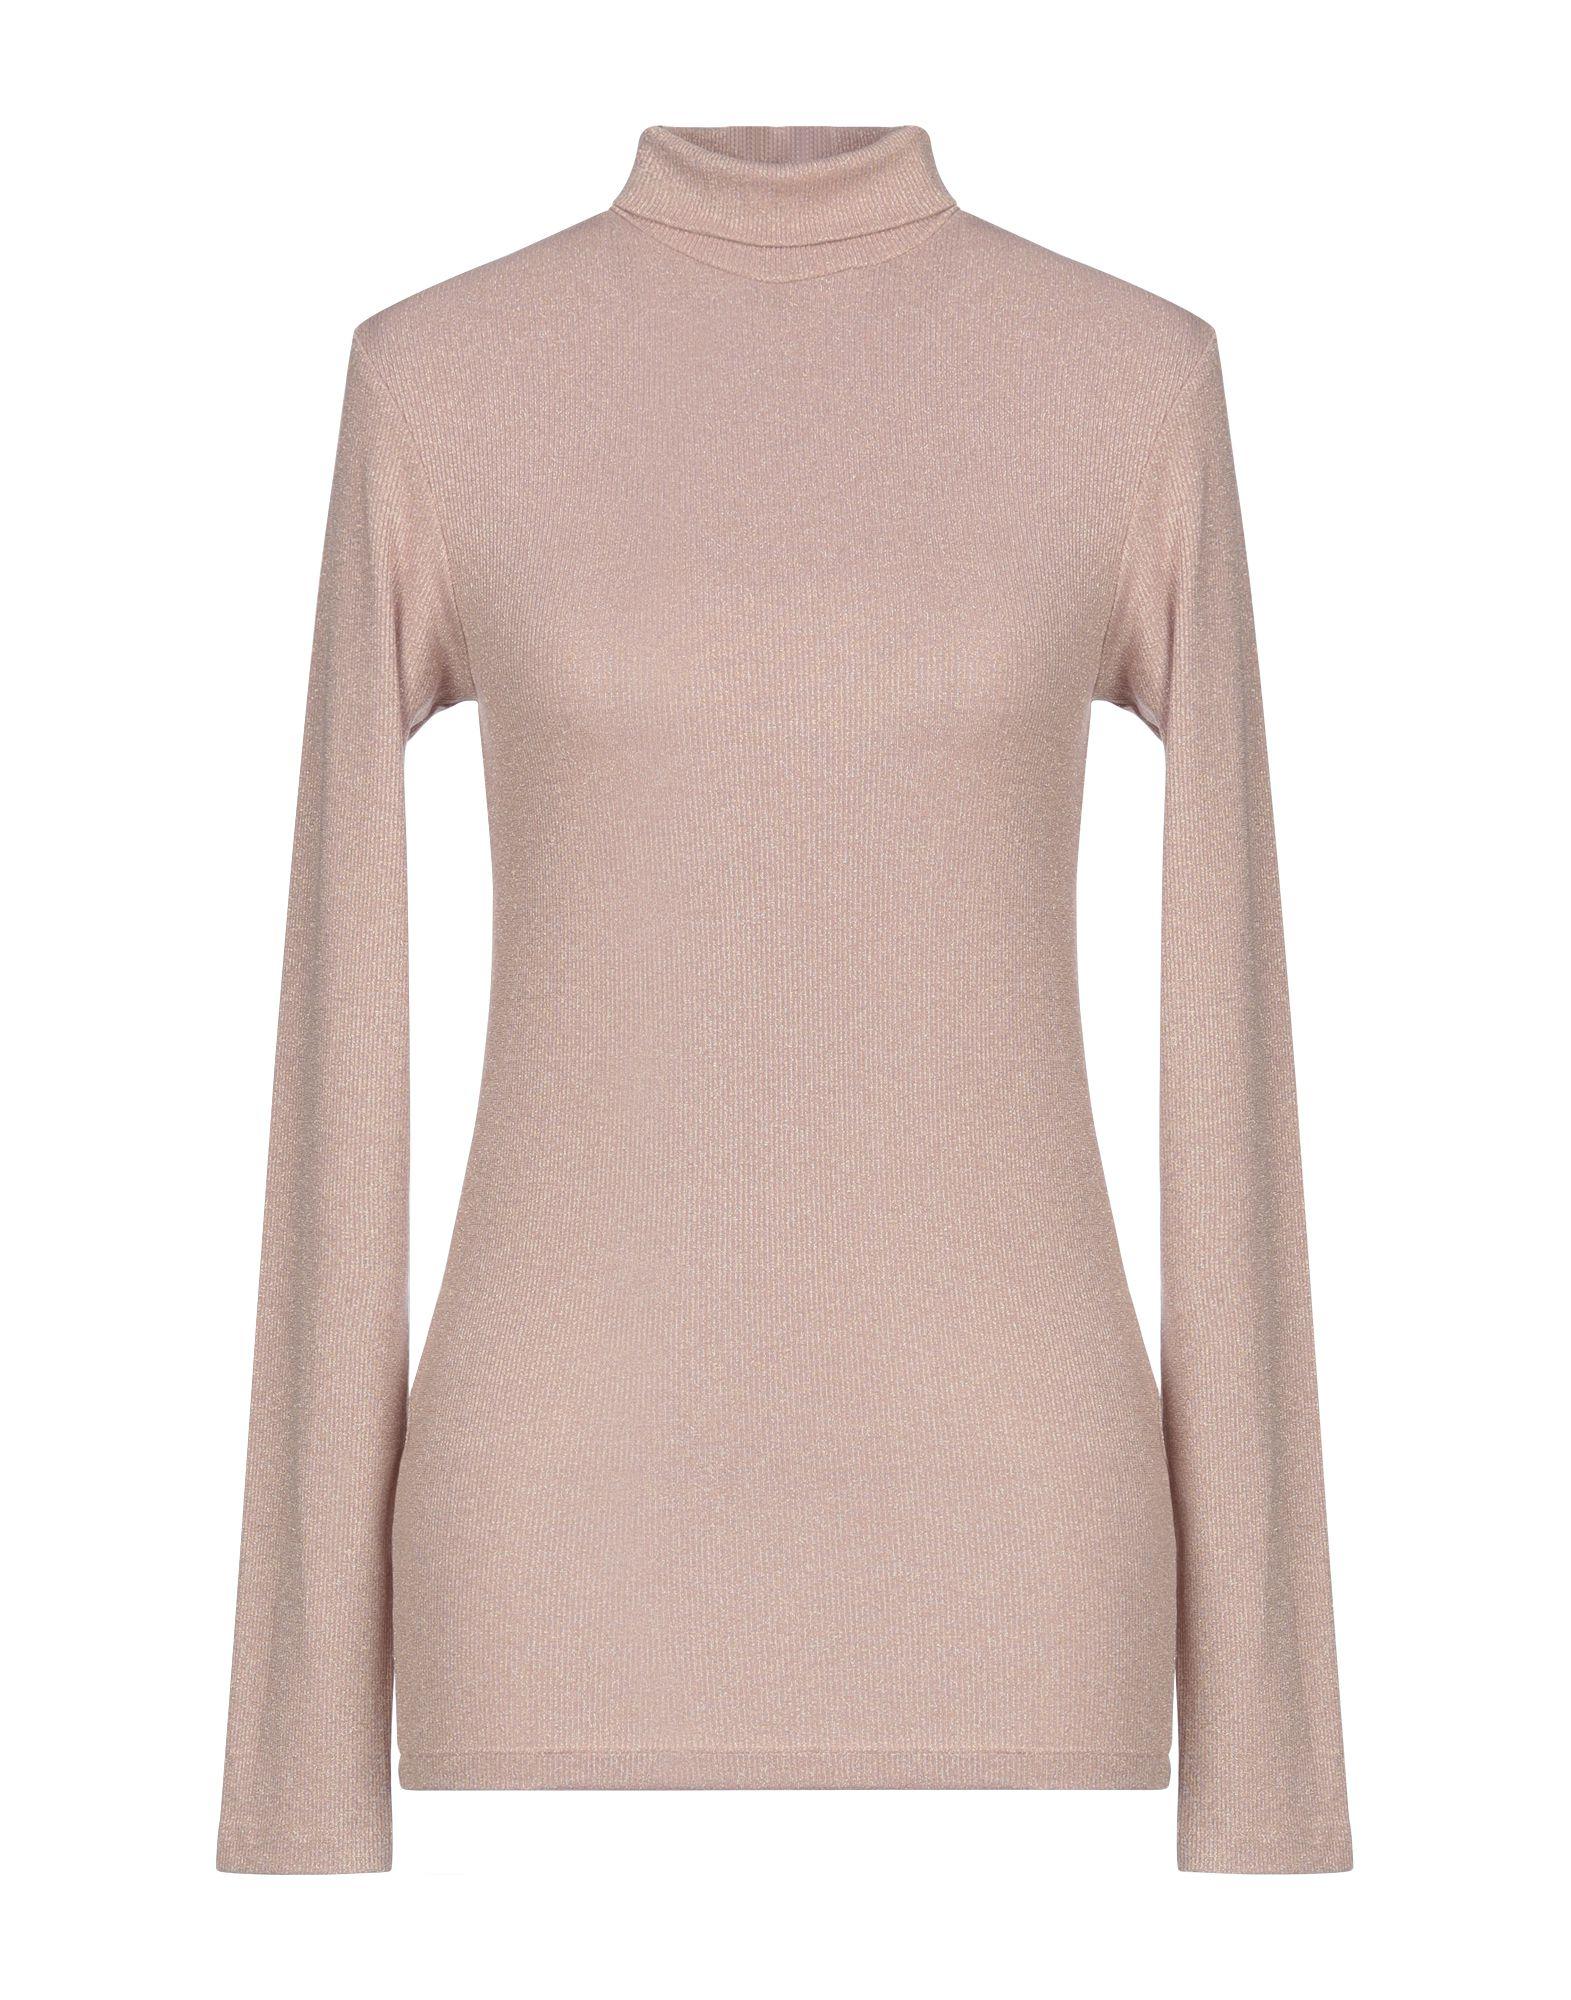 Pinko Synthetic Turtleneck in Pale Pink (Pink) - Lyst